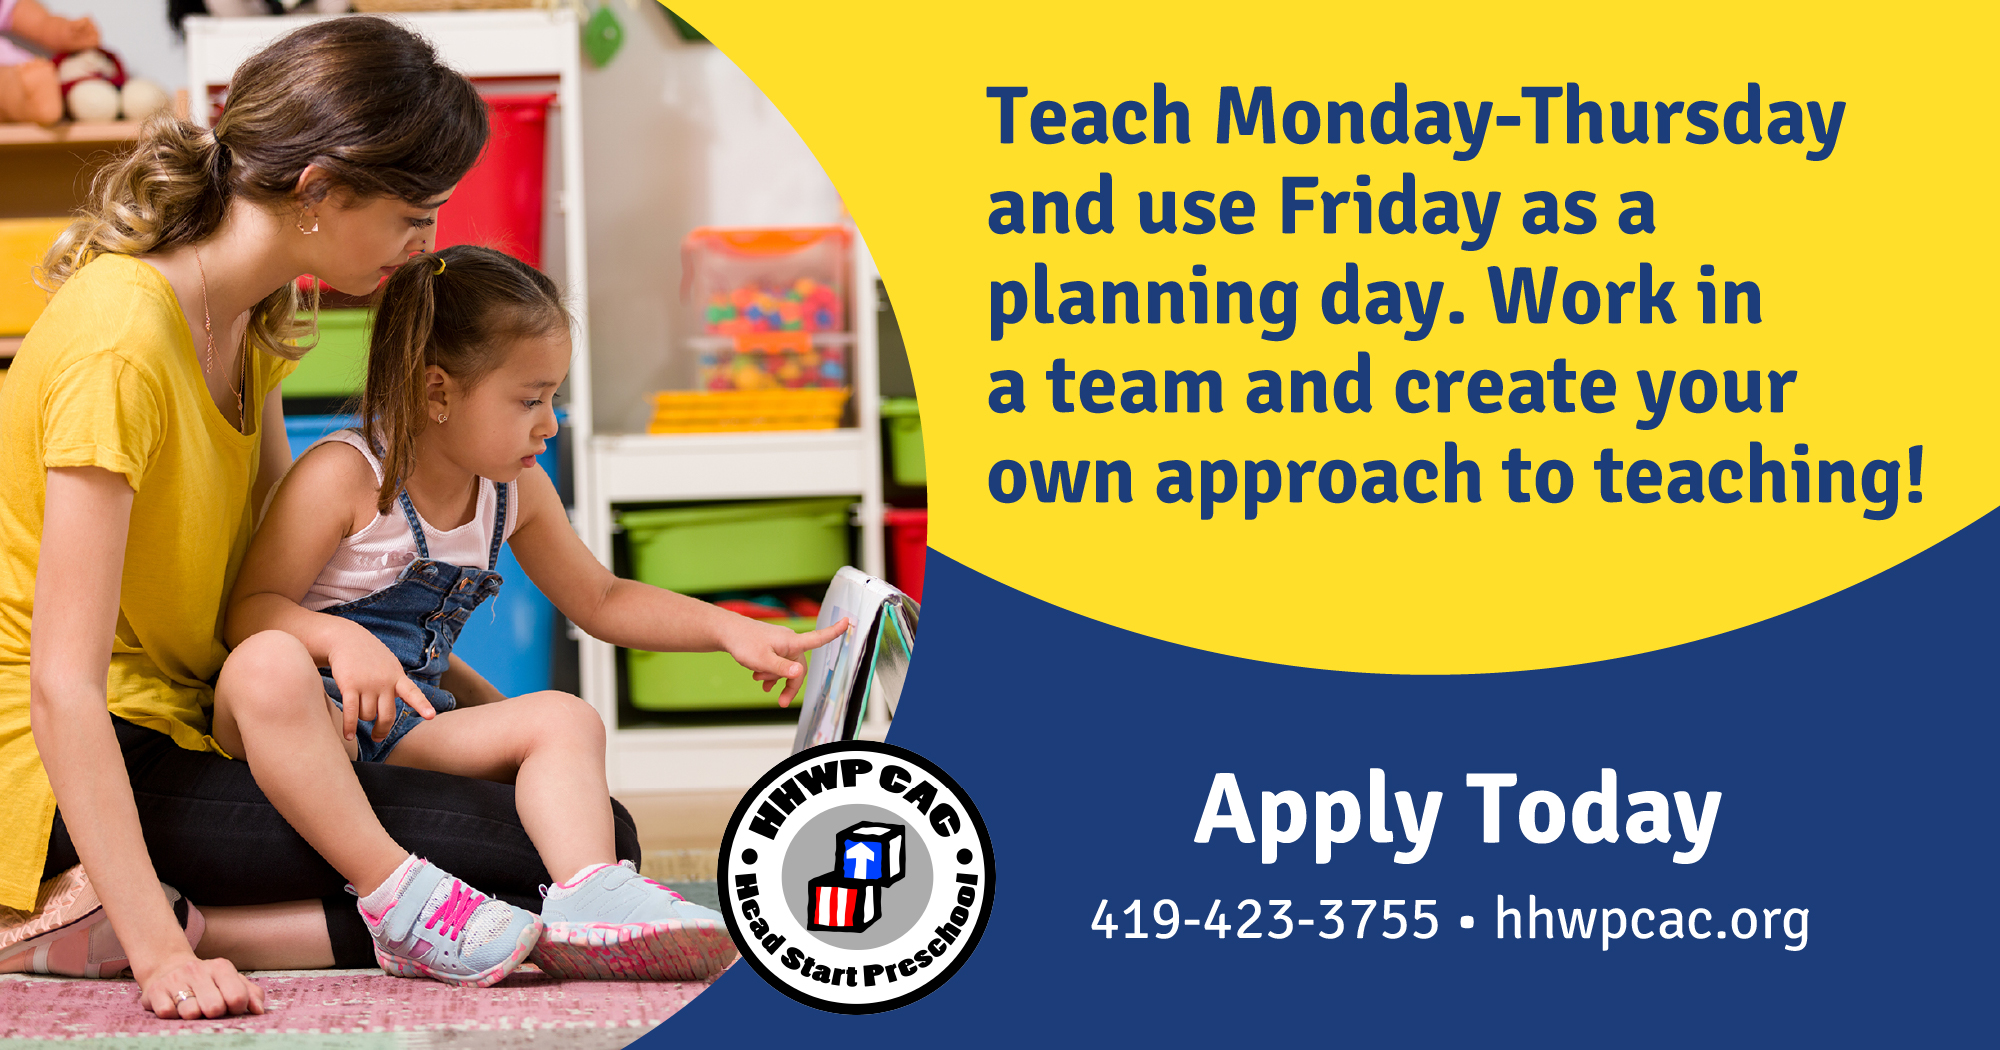 Apply today for head start teaching positions 419-423-3755